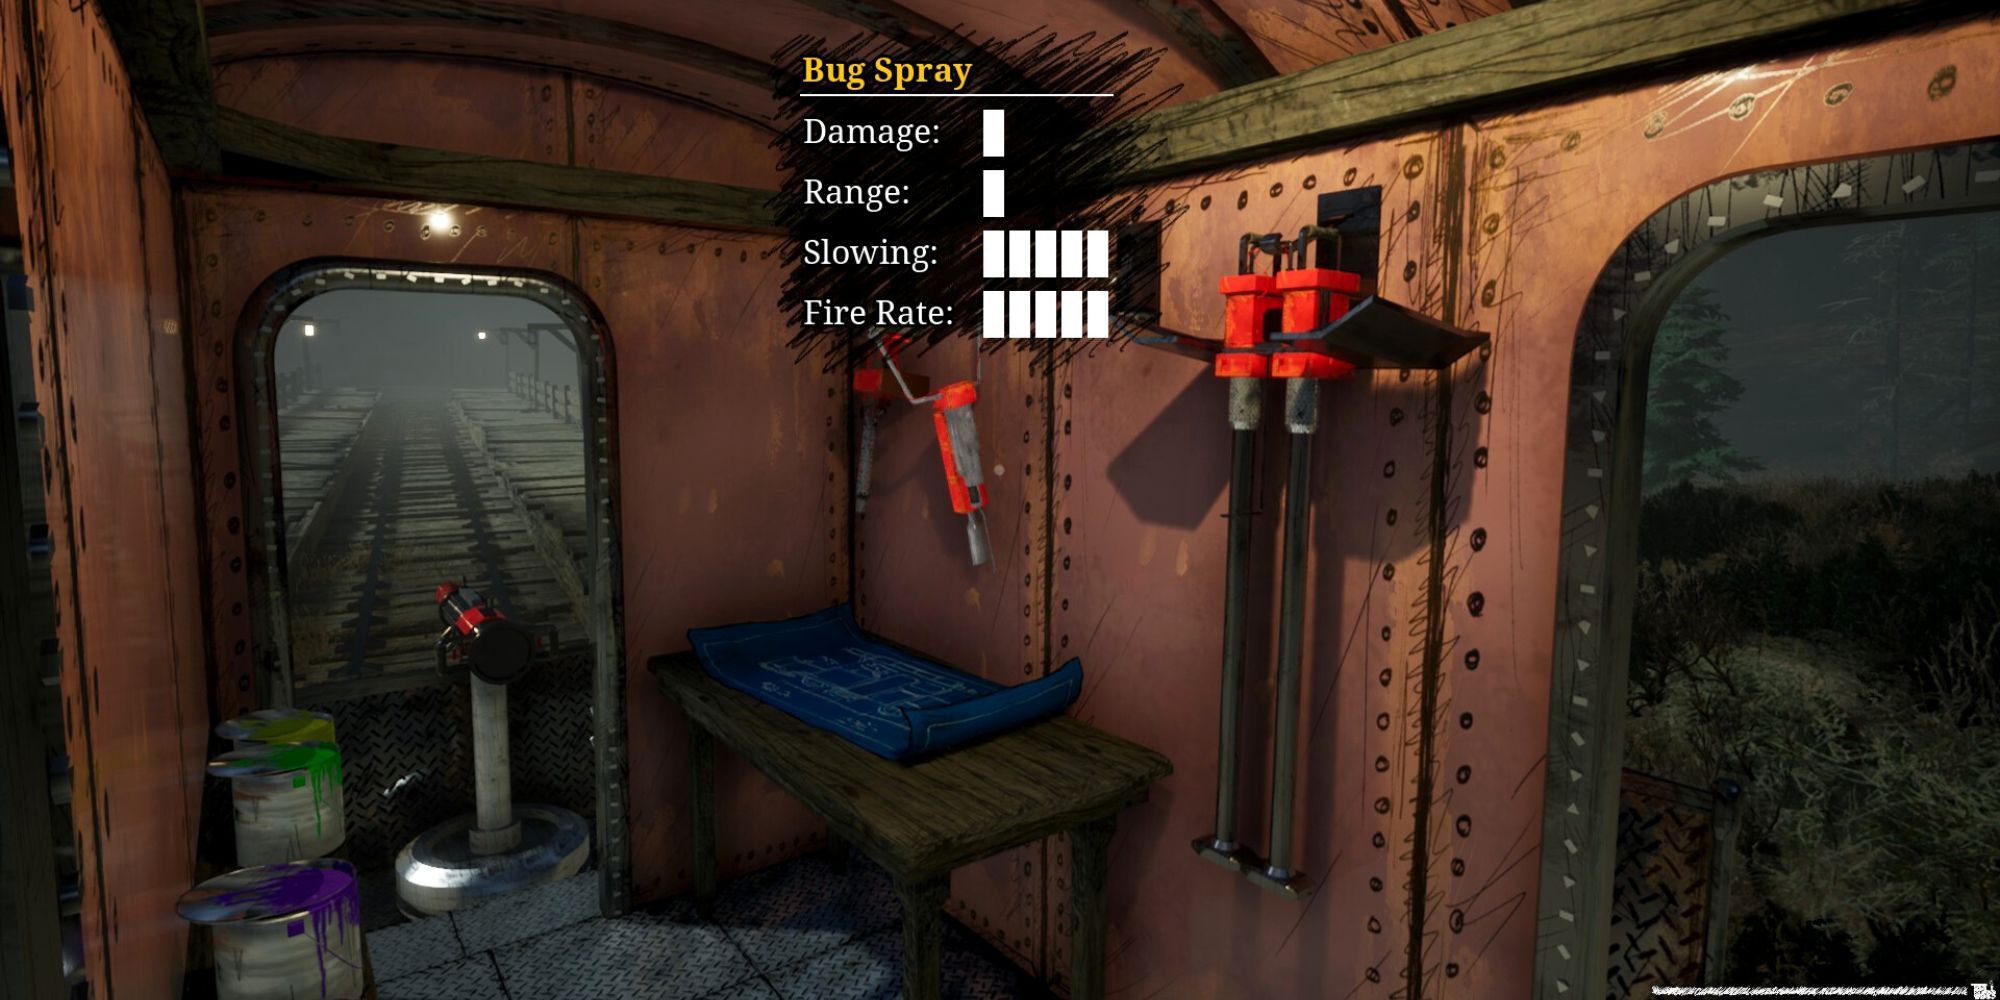 The inside of the player train, with weapons hung up on the wall, paint cans on a shelf, blueprints on a table, and the Bug Spray gun stats displayed